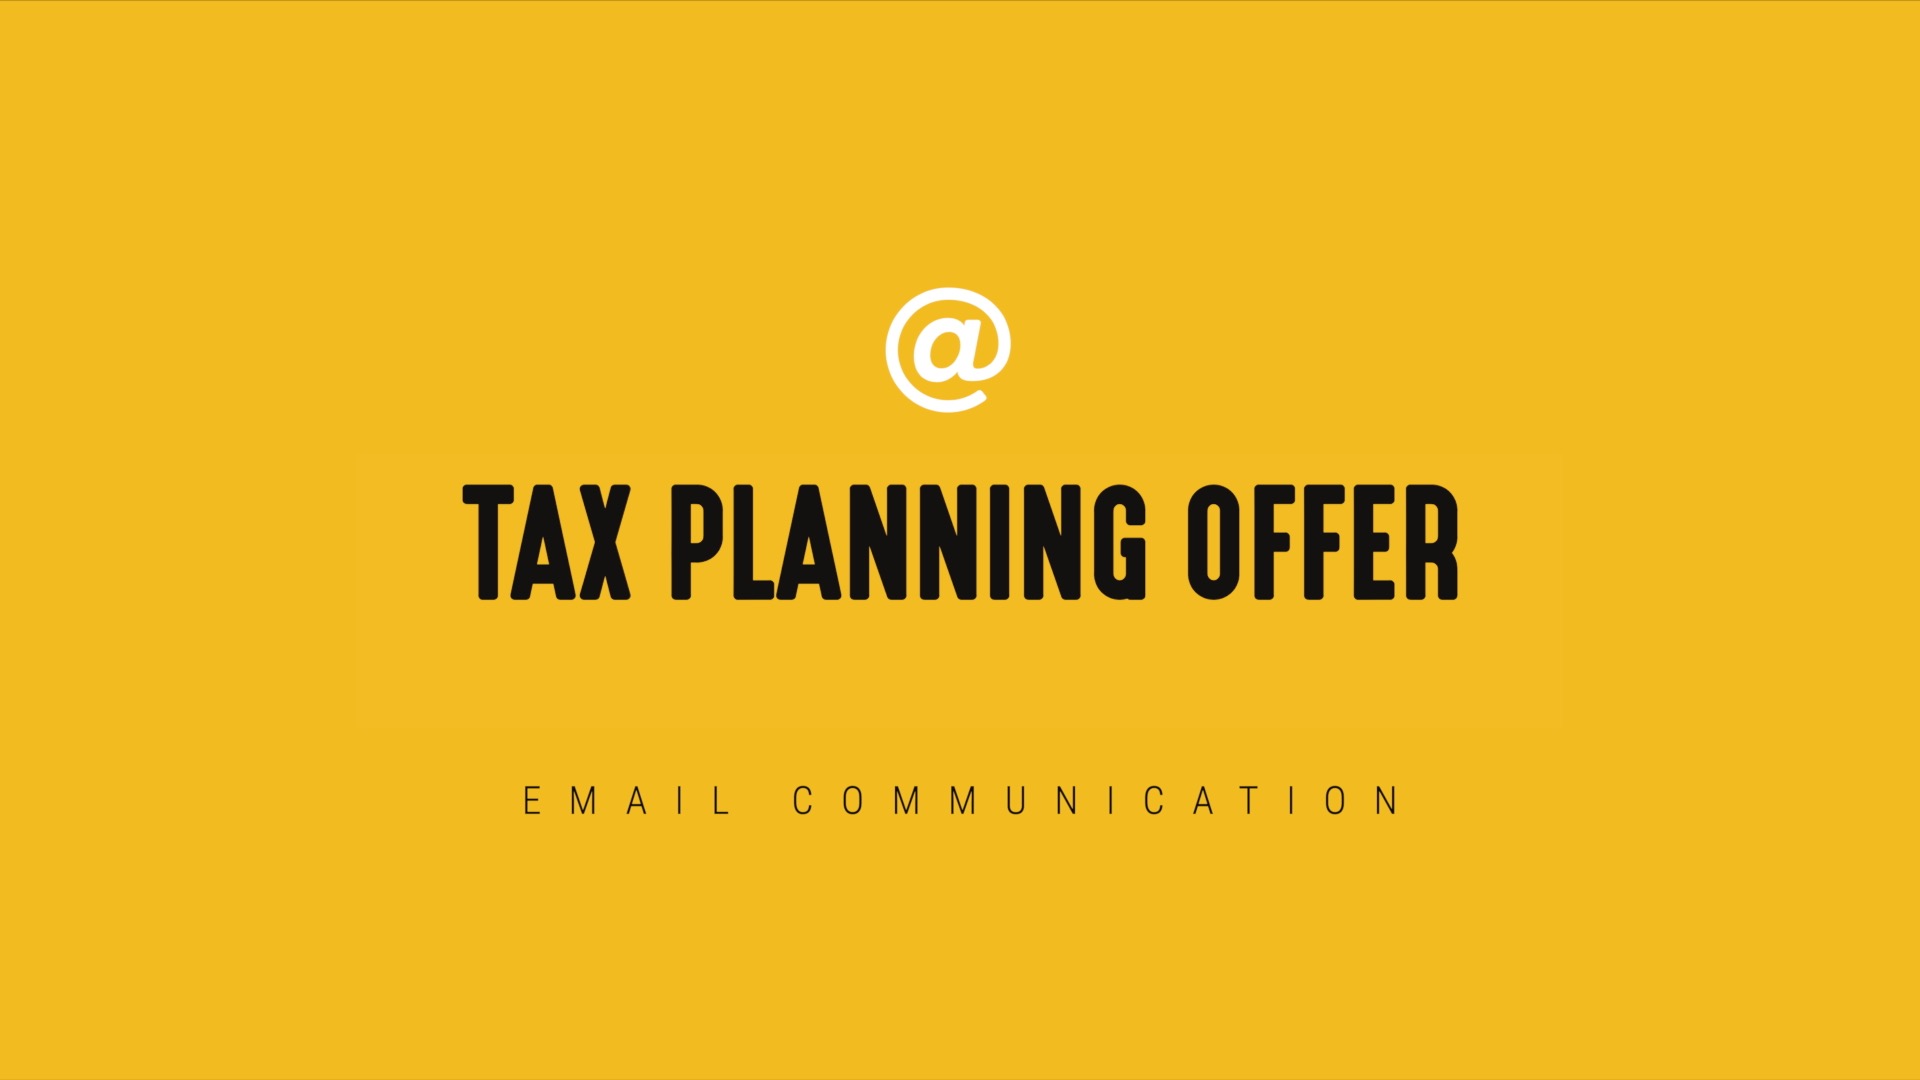 [NEW] Tax Planning Offer - Timely Email